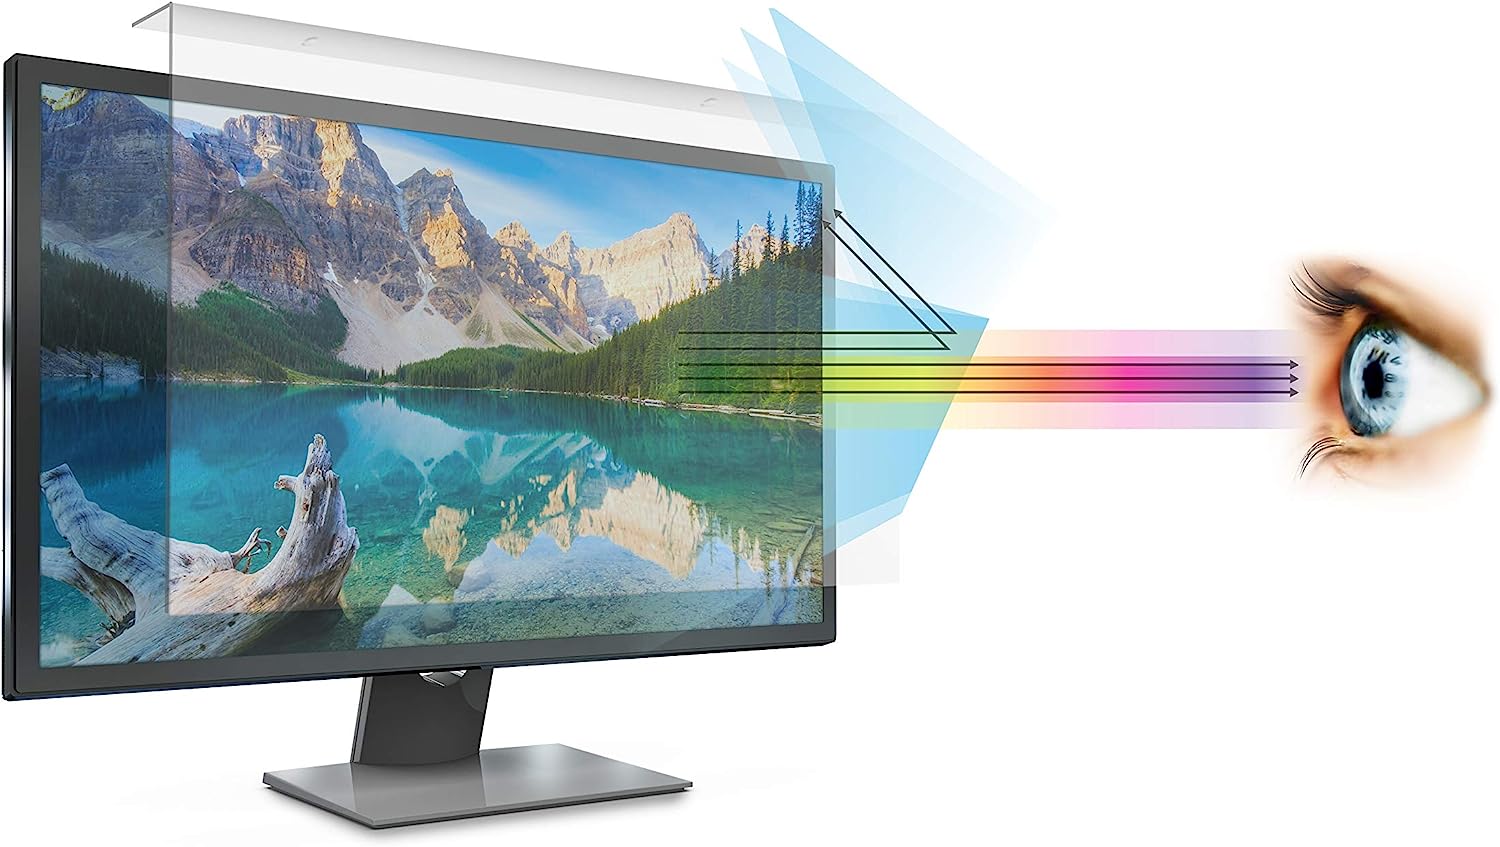 Anti Blue Light Screen Filter for 27 Inches Widescreen [...]